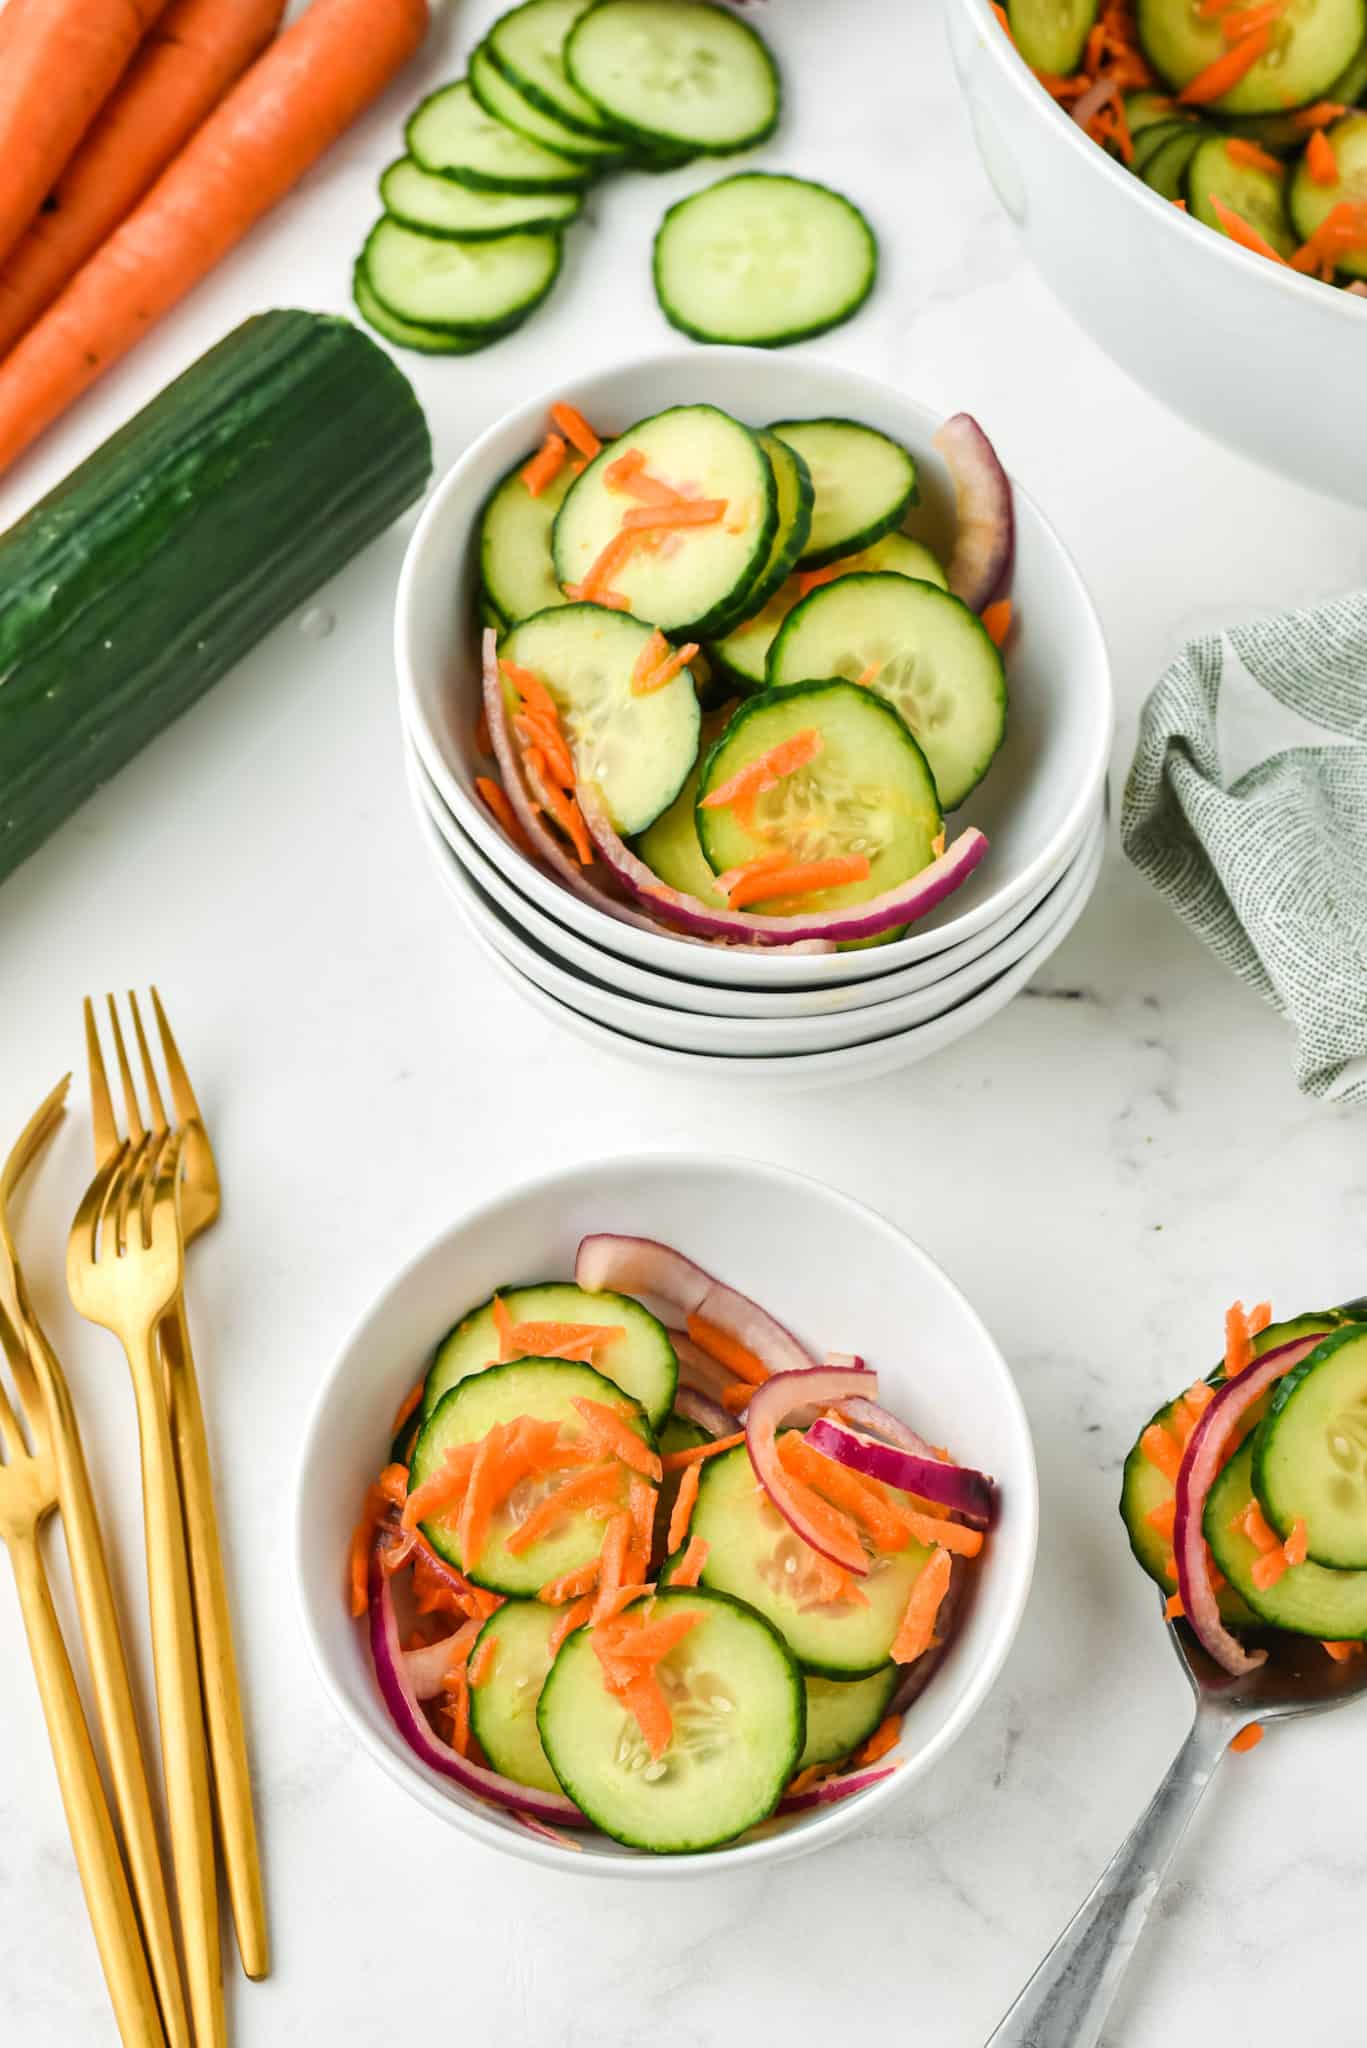 Small white bowls with servings of carrot cucumber salad.